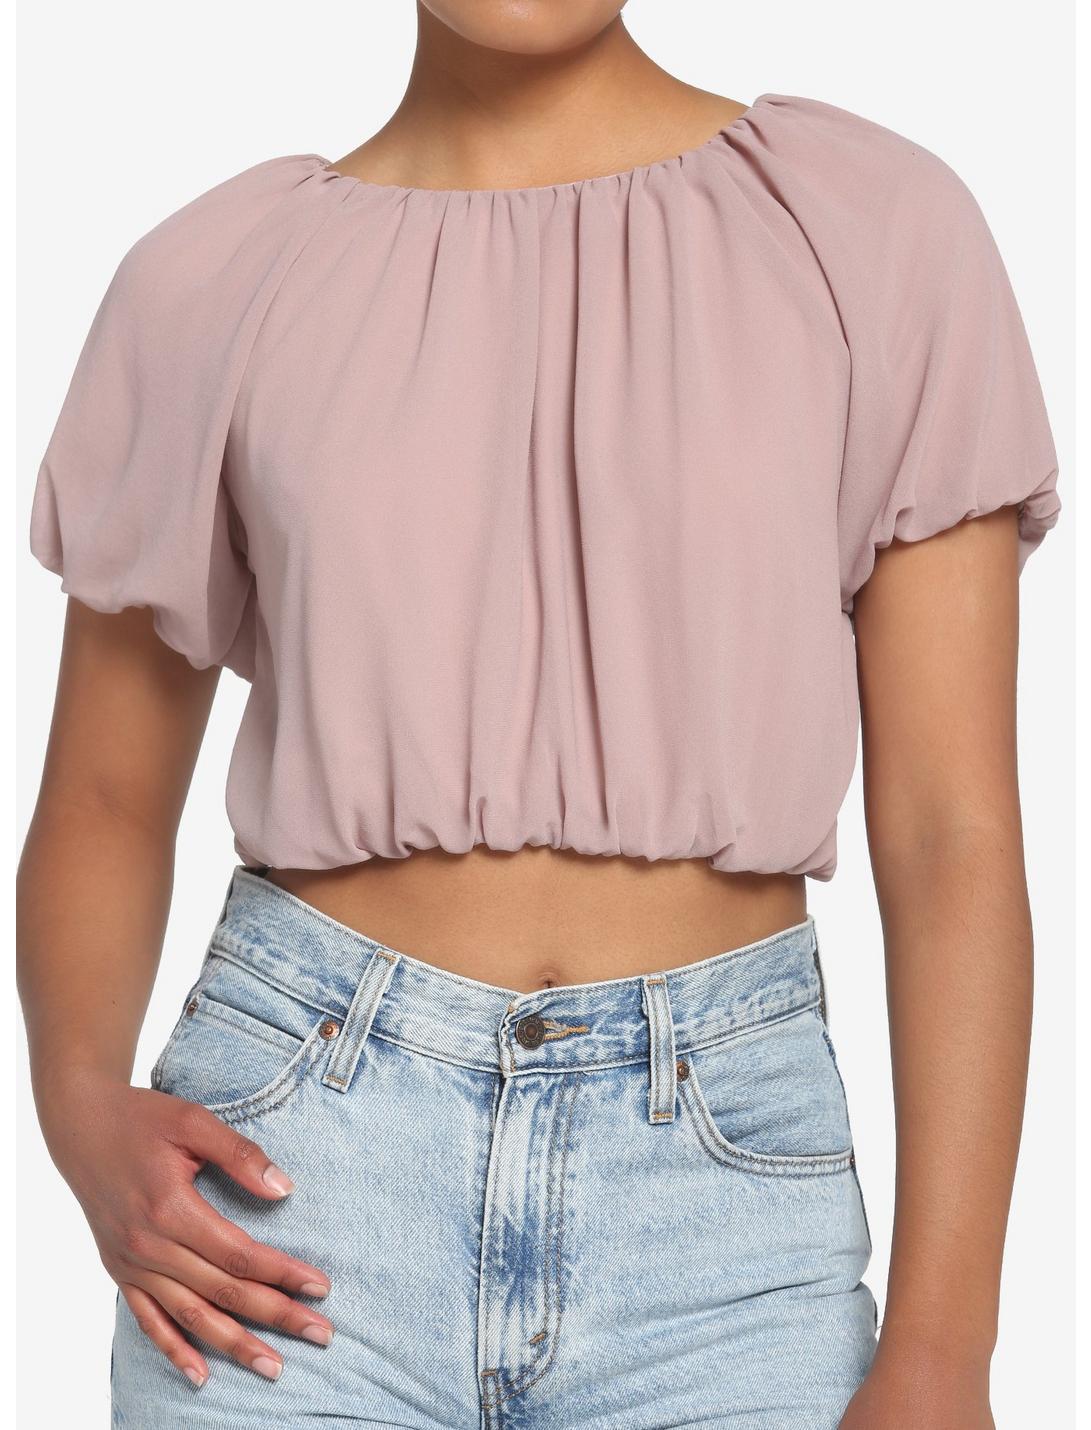 Ruched Puffy Taupe Girls Crop Top, TAUPE, hi-res